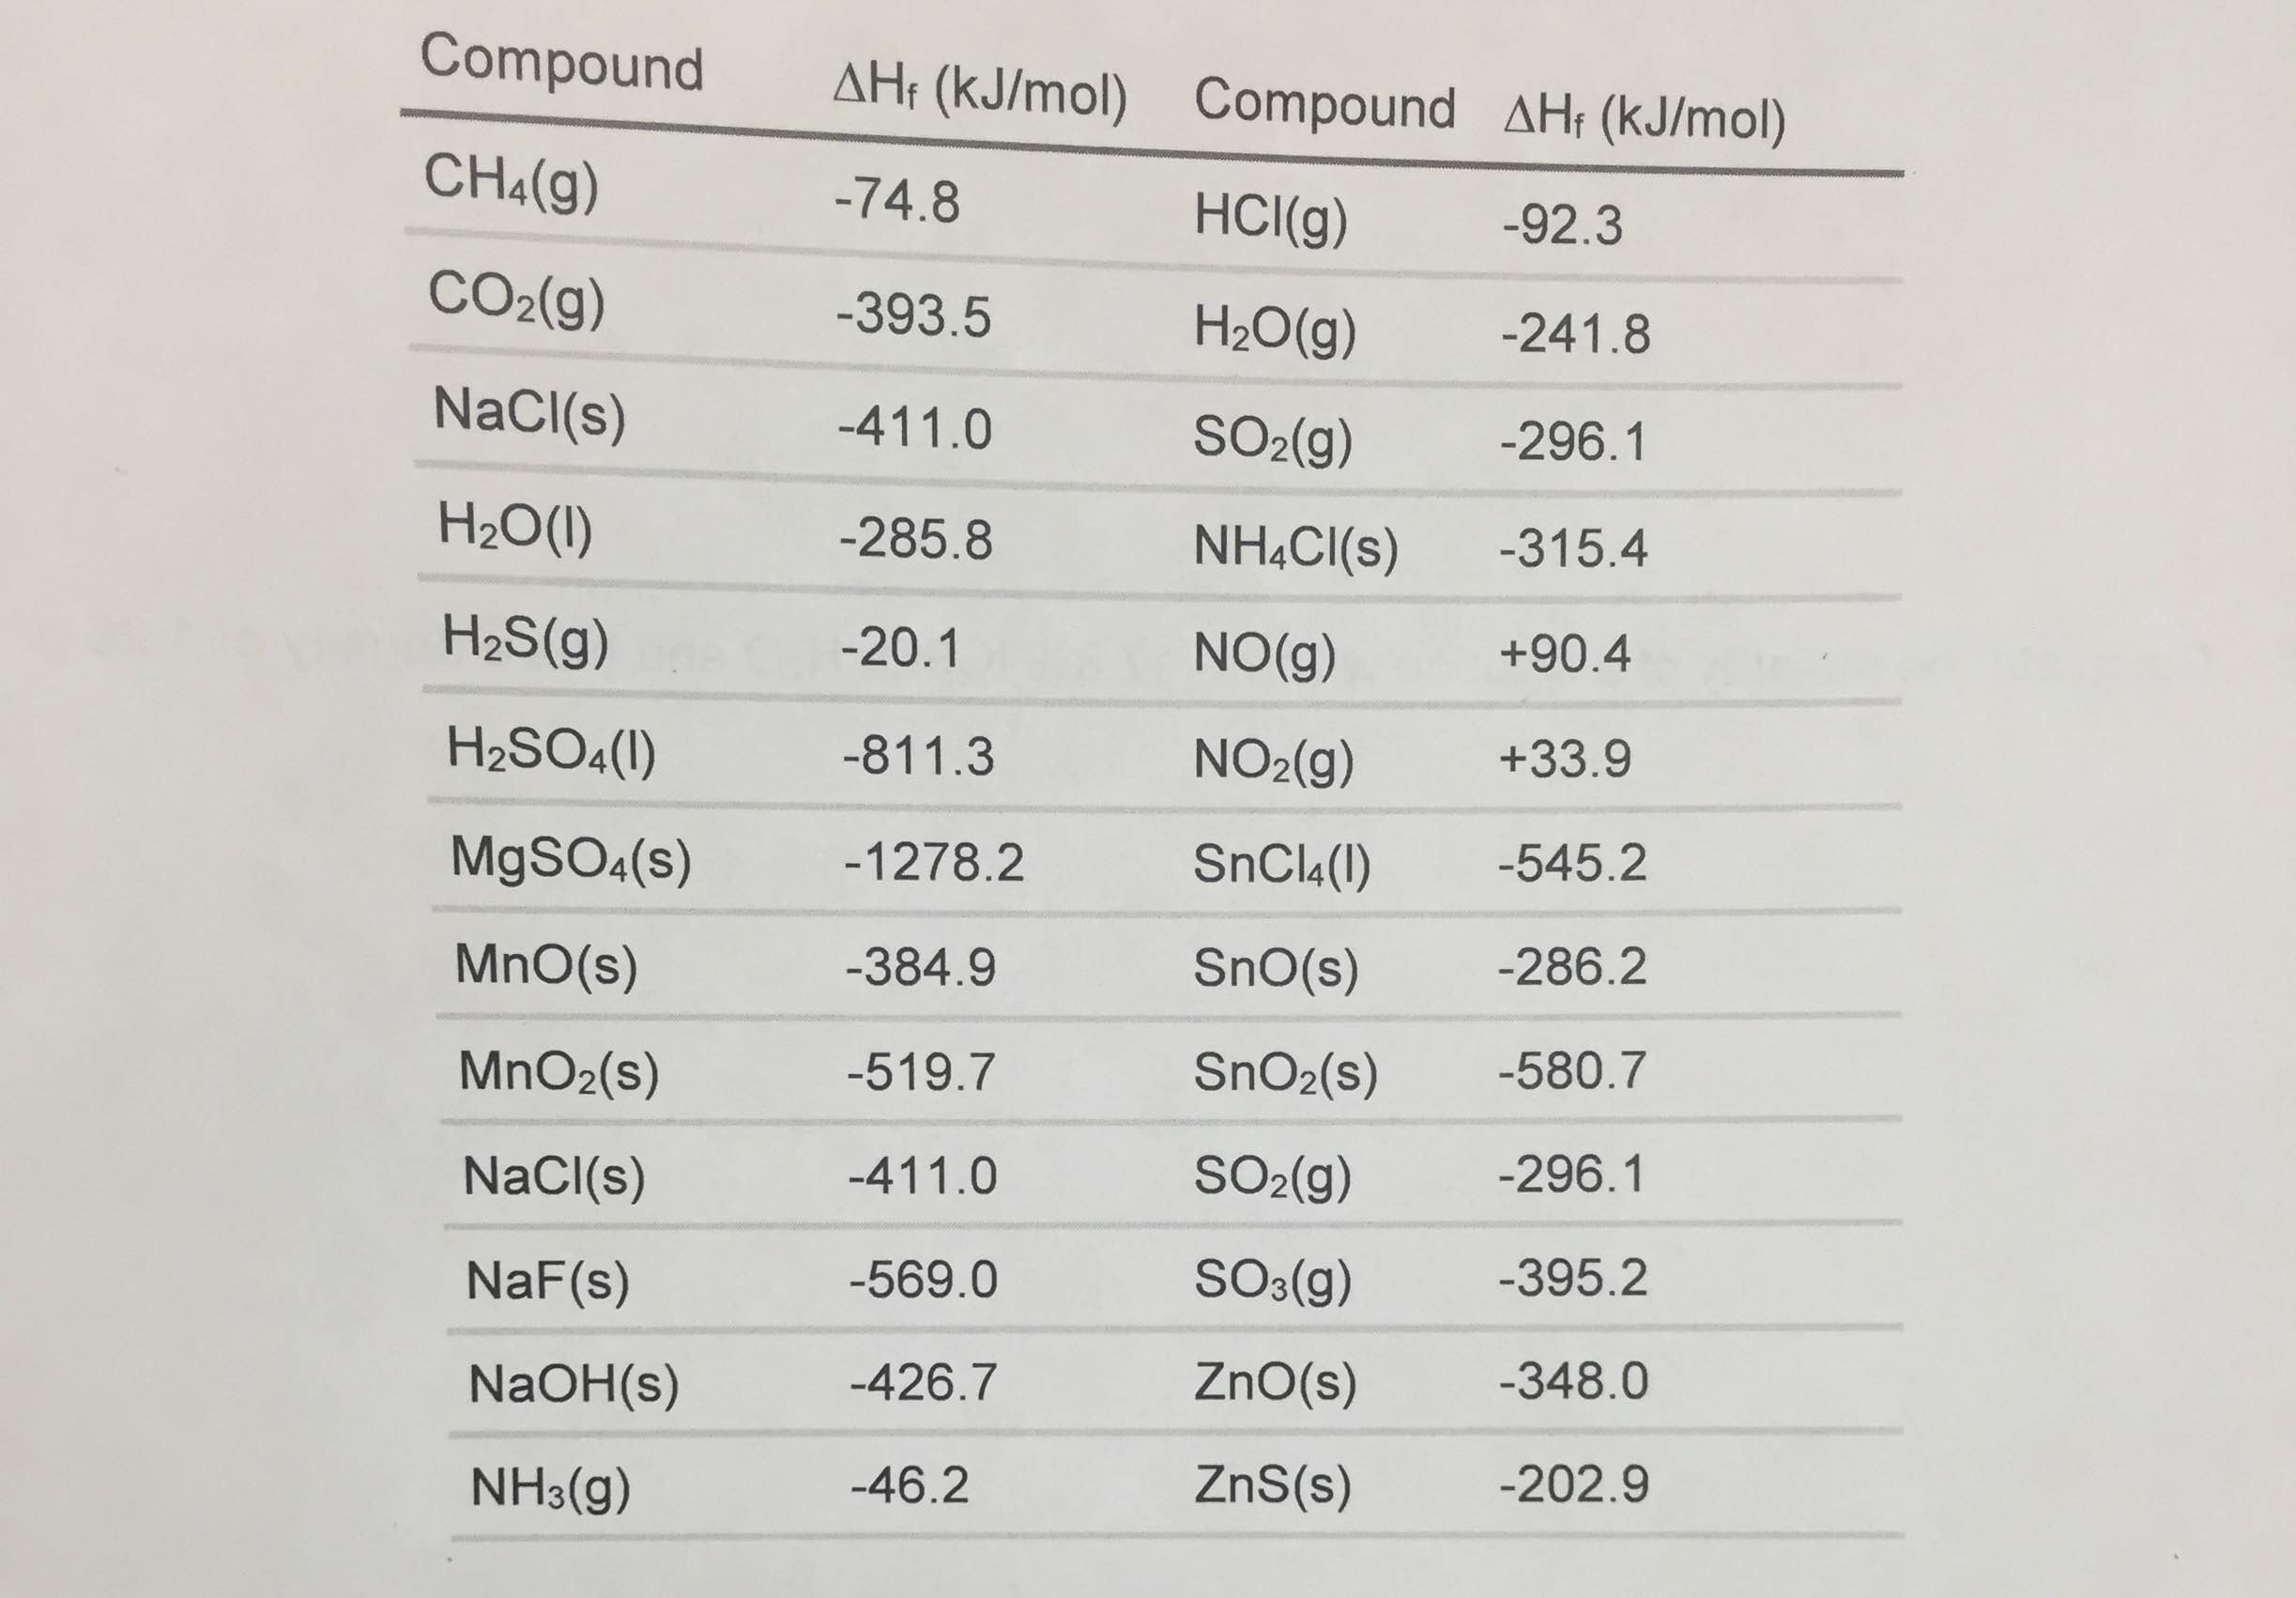 standard enthalpy of formation table